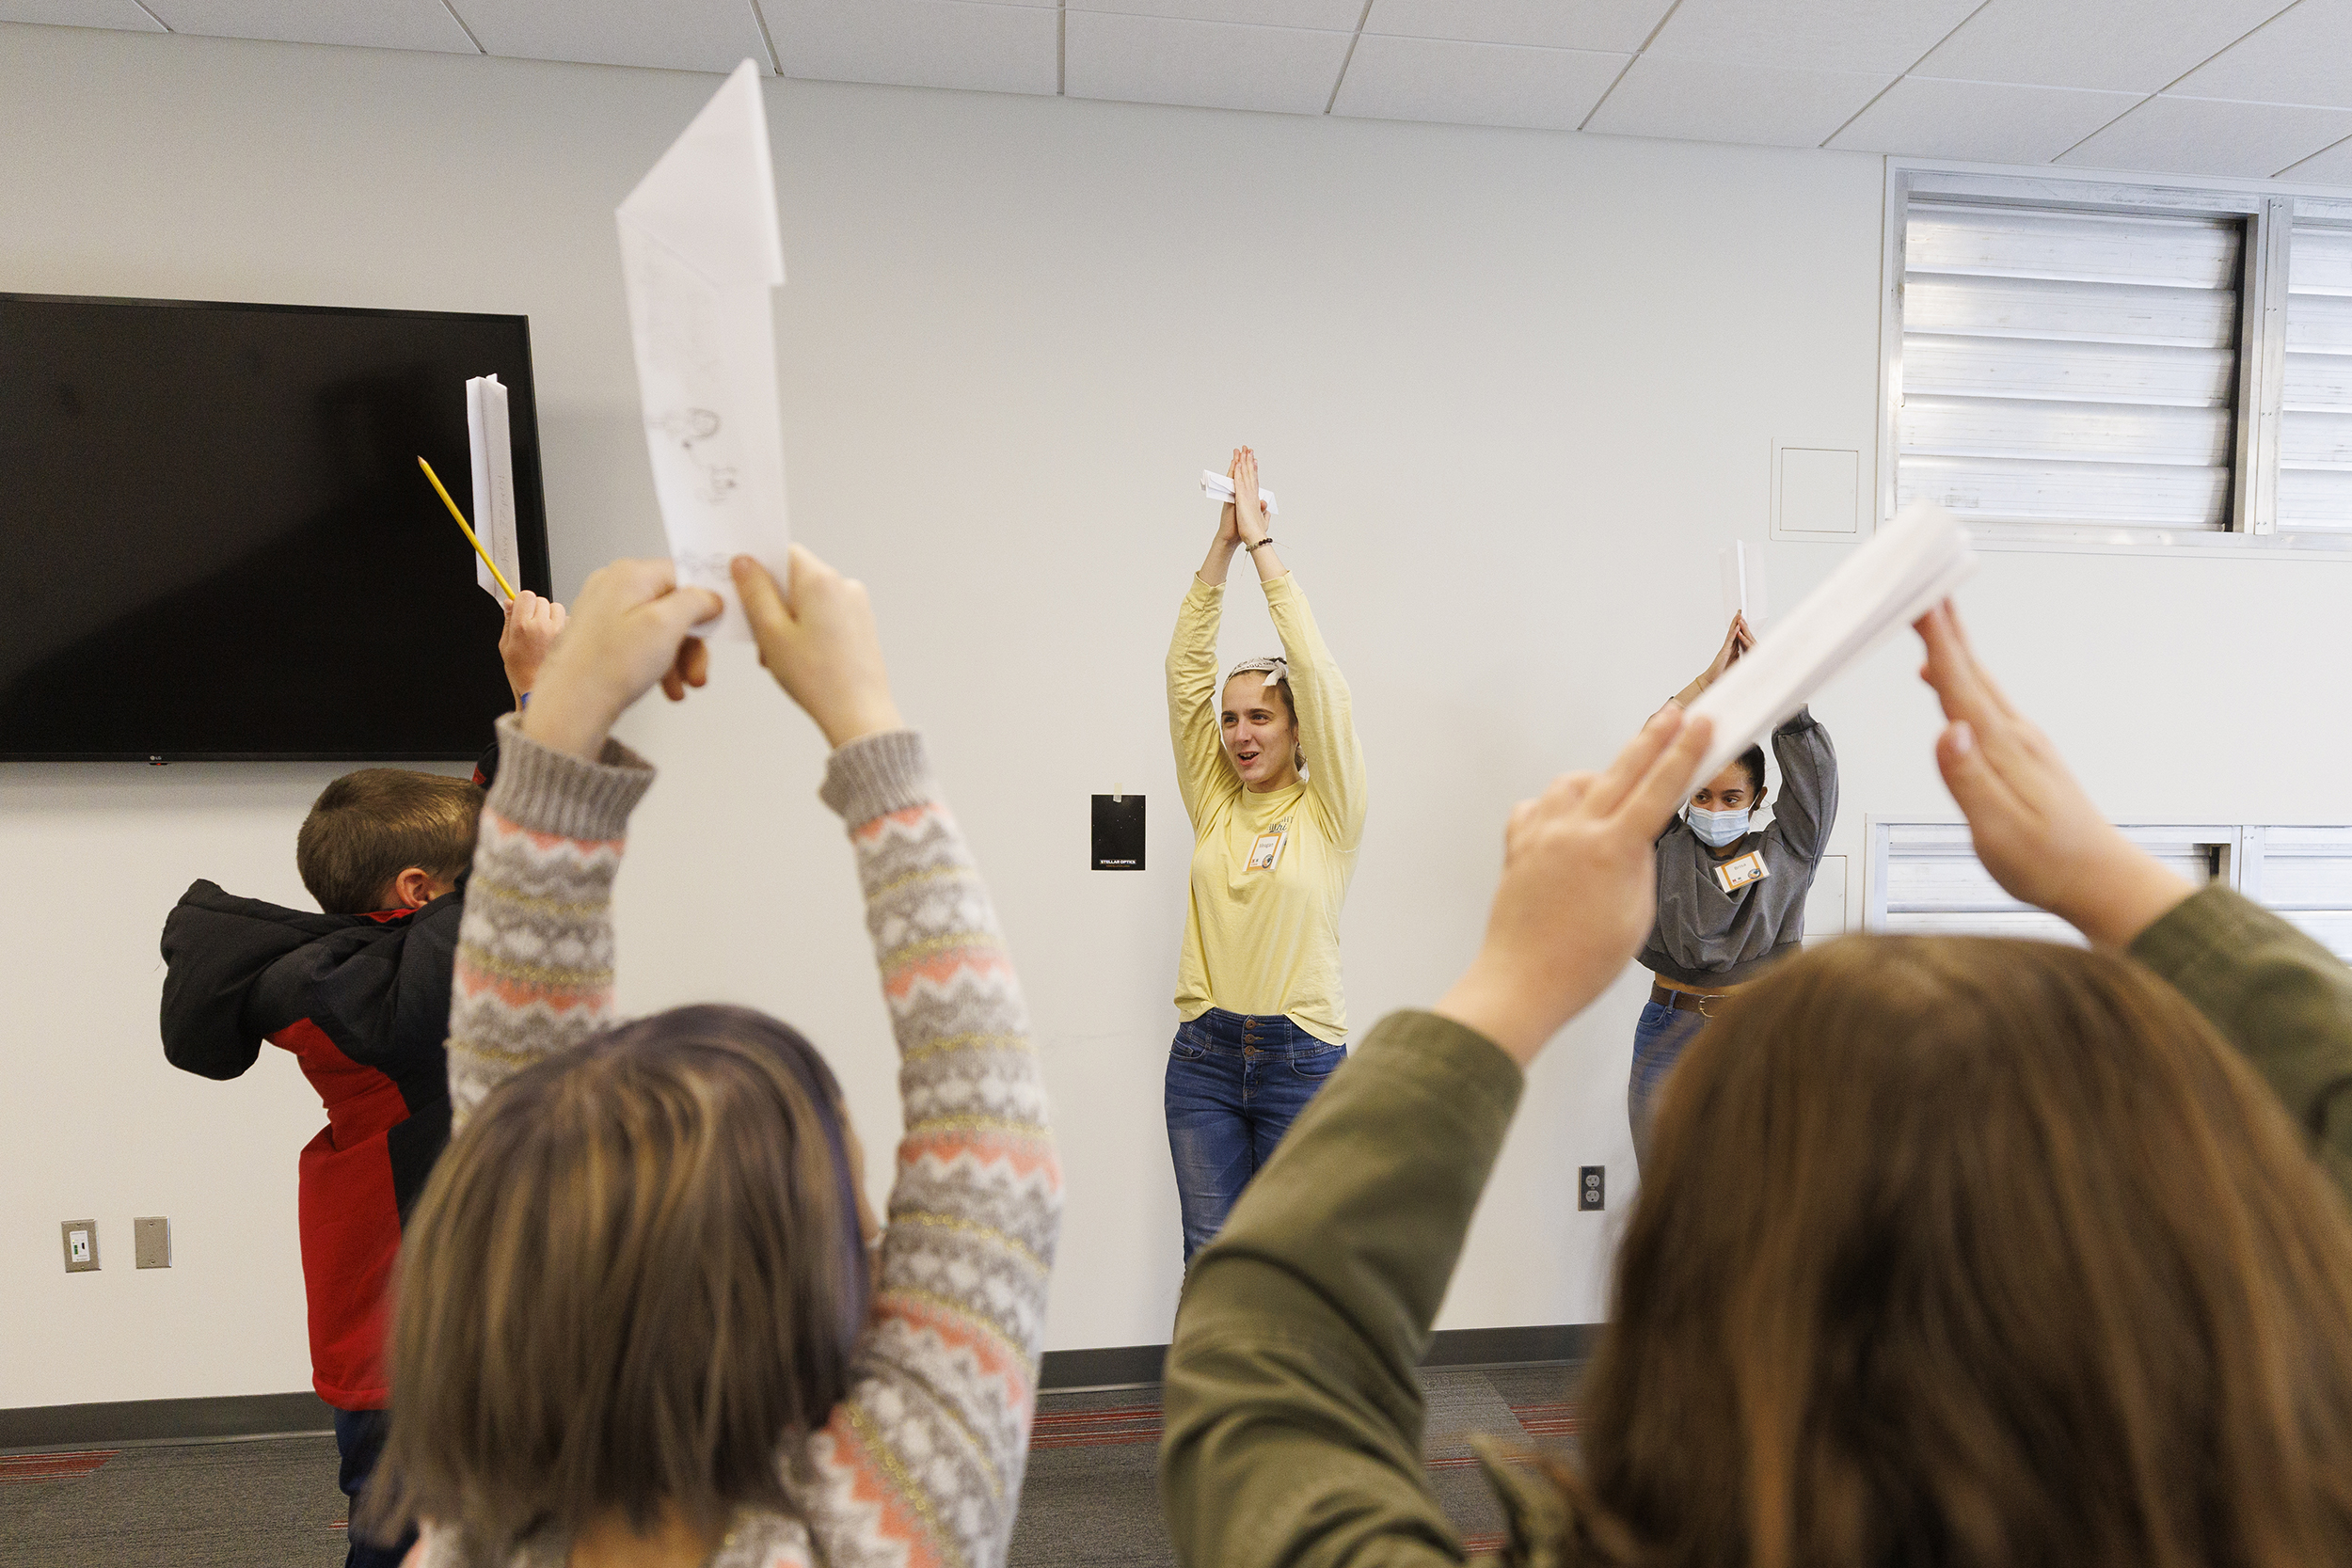 Students pretend they are pencils in an ice-breaking exercise led by Meagan Heimbrecht during a "Galactic Quest" workshop at the Crete Public Library.